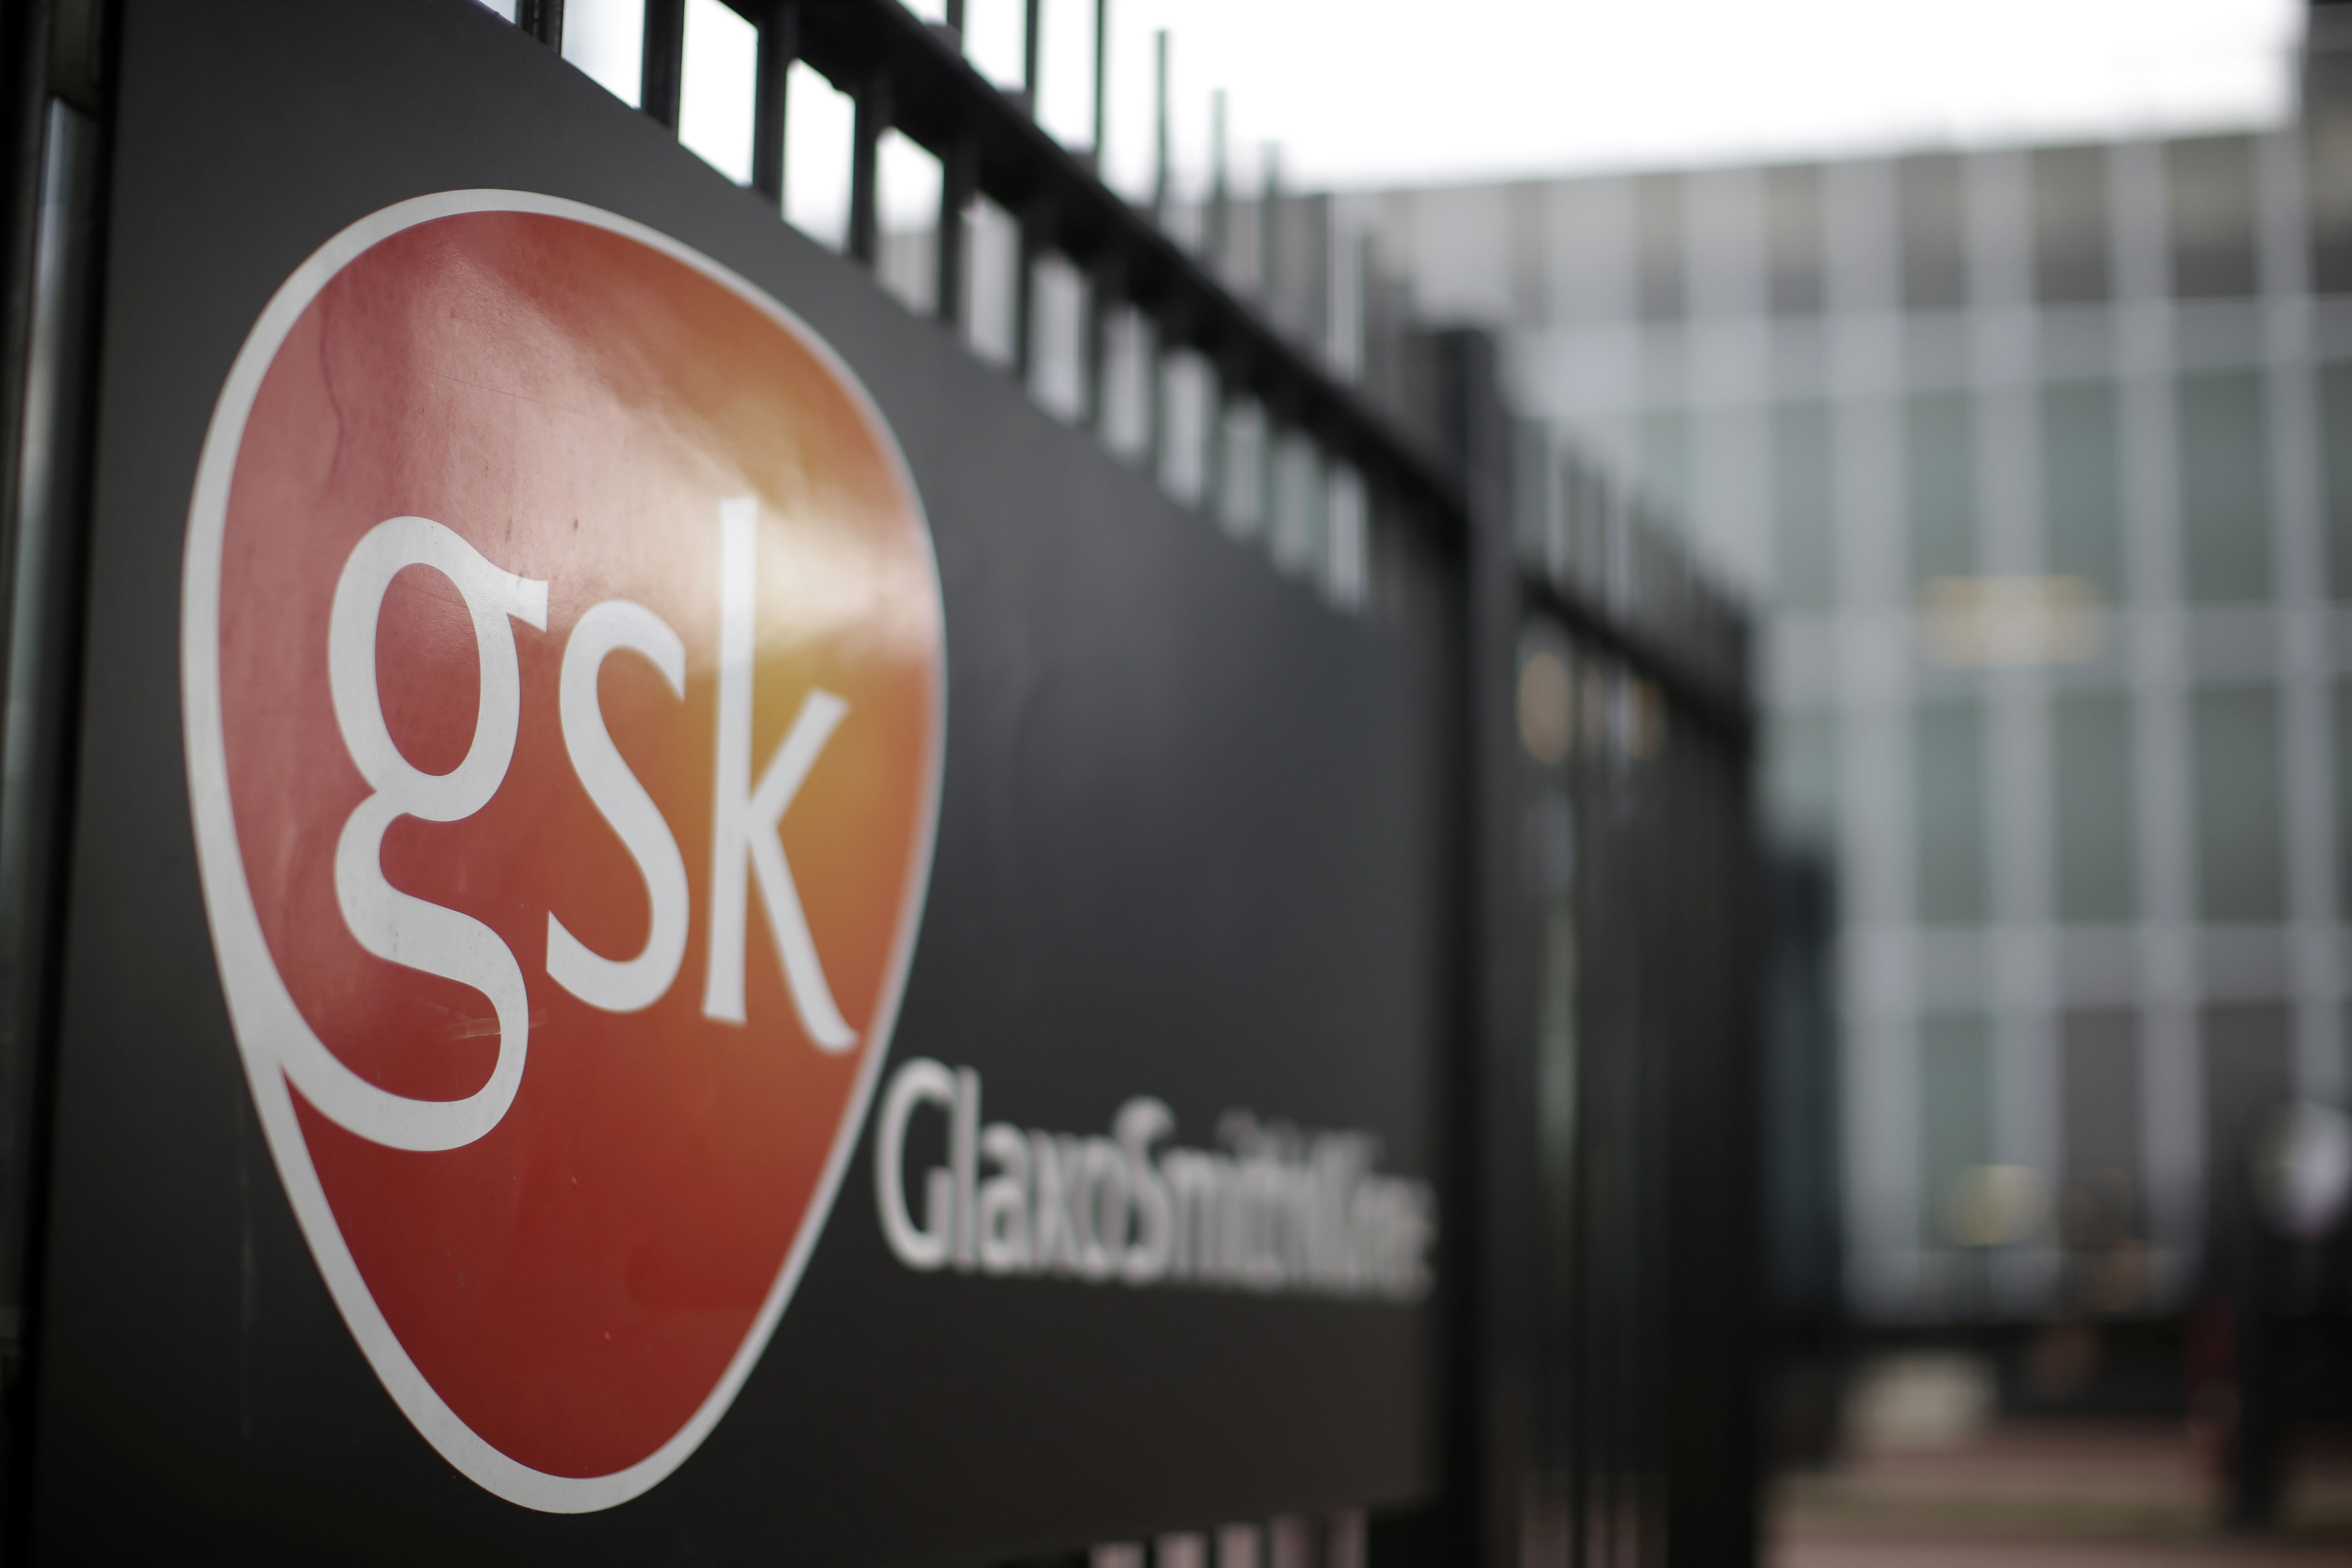 The logo of GlaxoSmithKline Plc sits on a sign outside the pharmaceutical company's headquarters in London, U.K., on Tuesday, April 22, 2014. (Matthew Lloyd/Bloomberg via Getty Images)